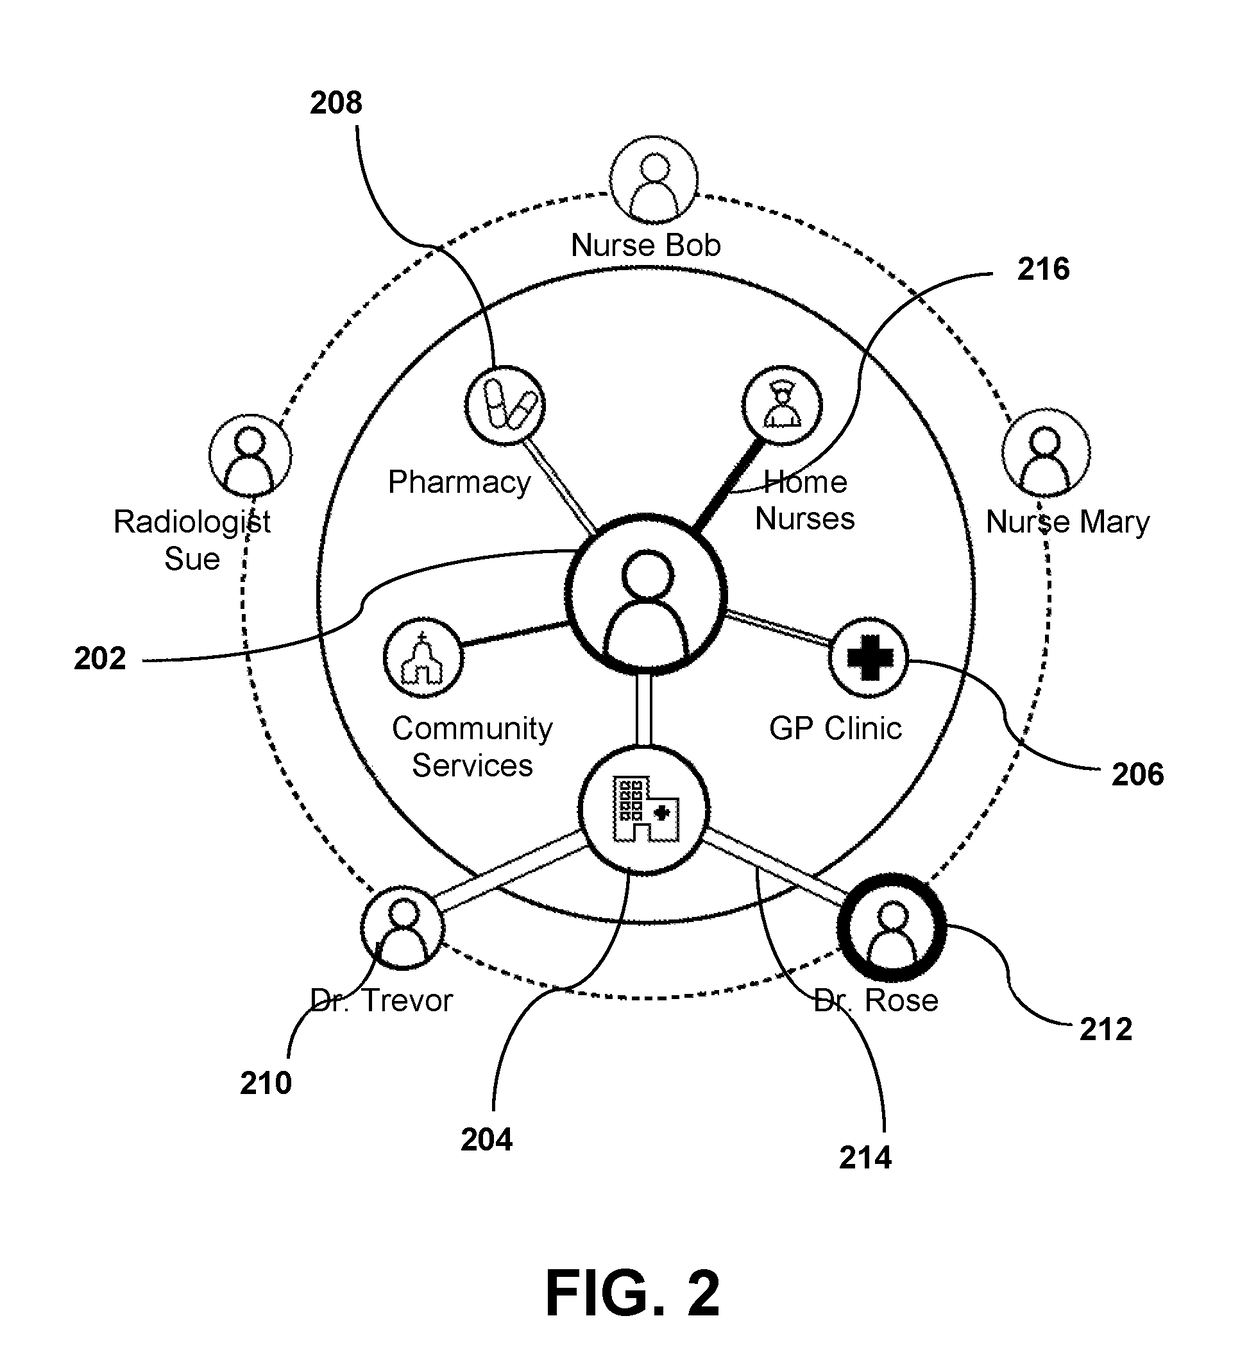 System and method for facilitating visualization of interactions in a network of care providers